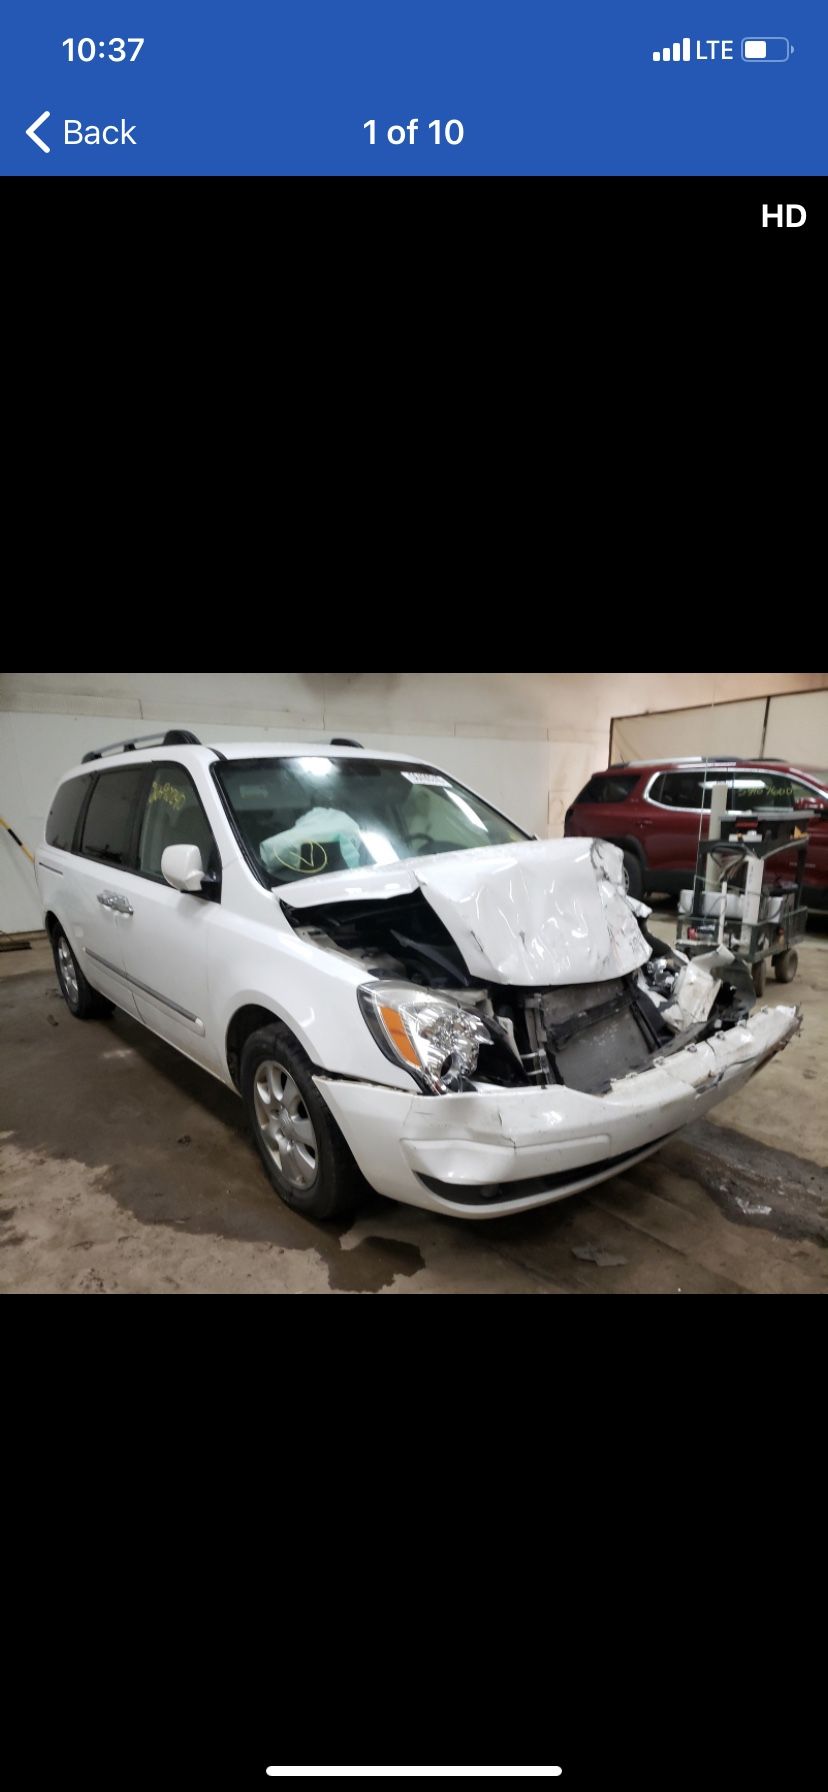 2008 Hyundai Entourage, Hit In The Front - For Parts